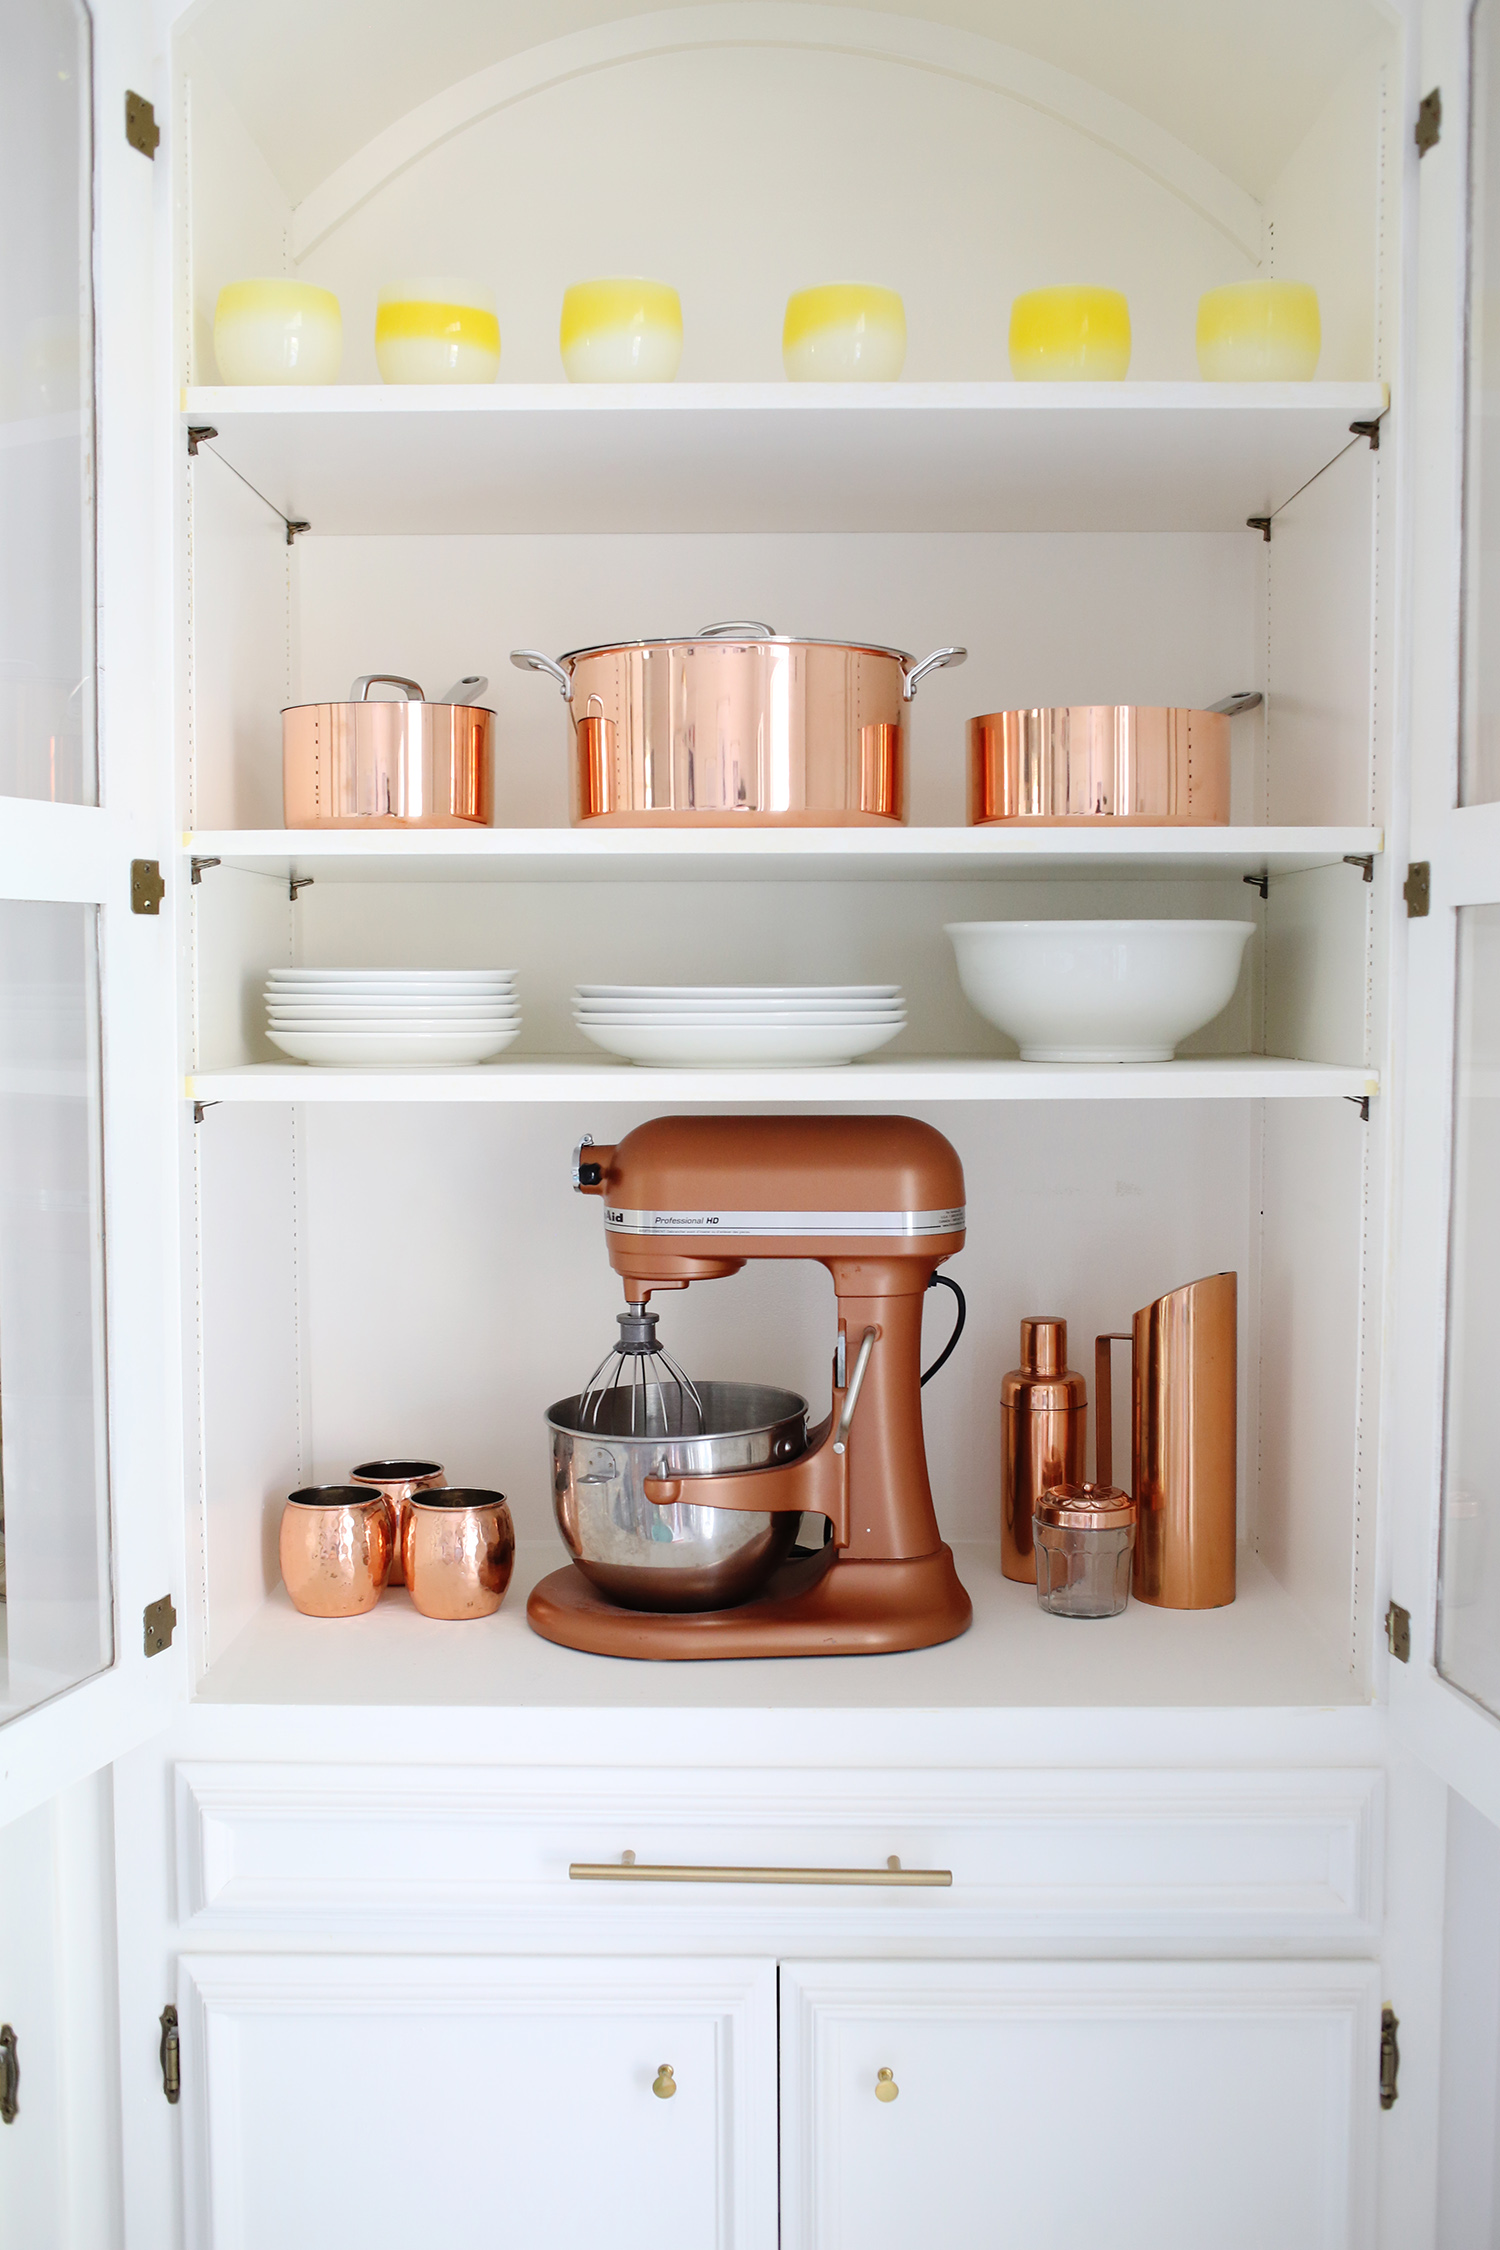 inside a cabinet with copper pots, a cooper blender, and white plates